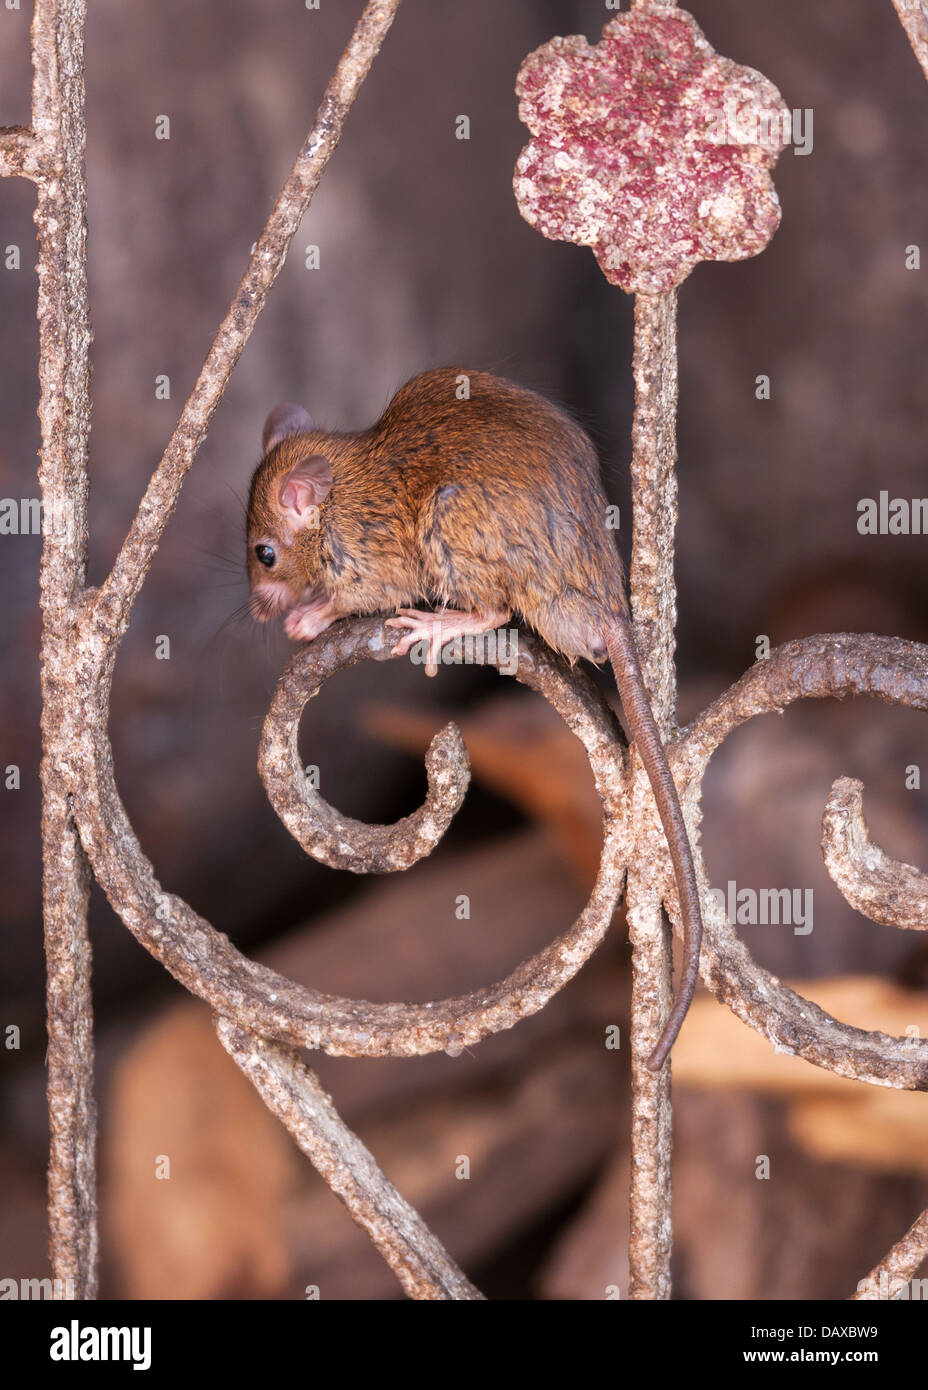 Single rat climbed high on metal fence at Deshnoke's temple in Rajasthan. Stock Photo